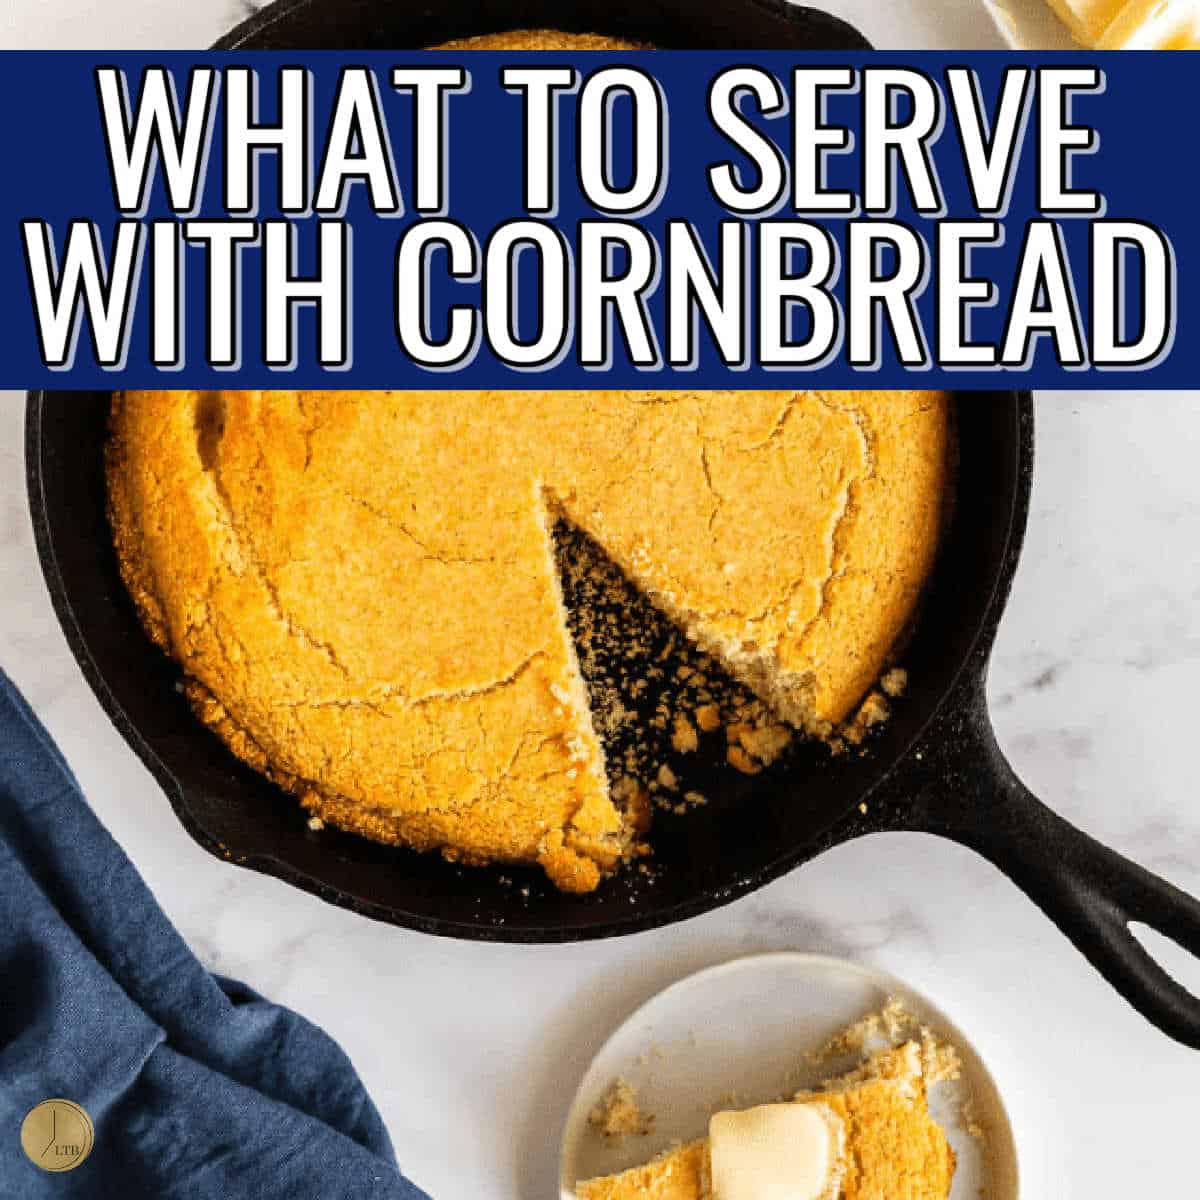 pan of cornbread with text "what to serve with"